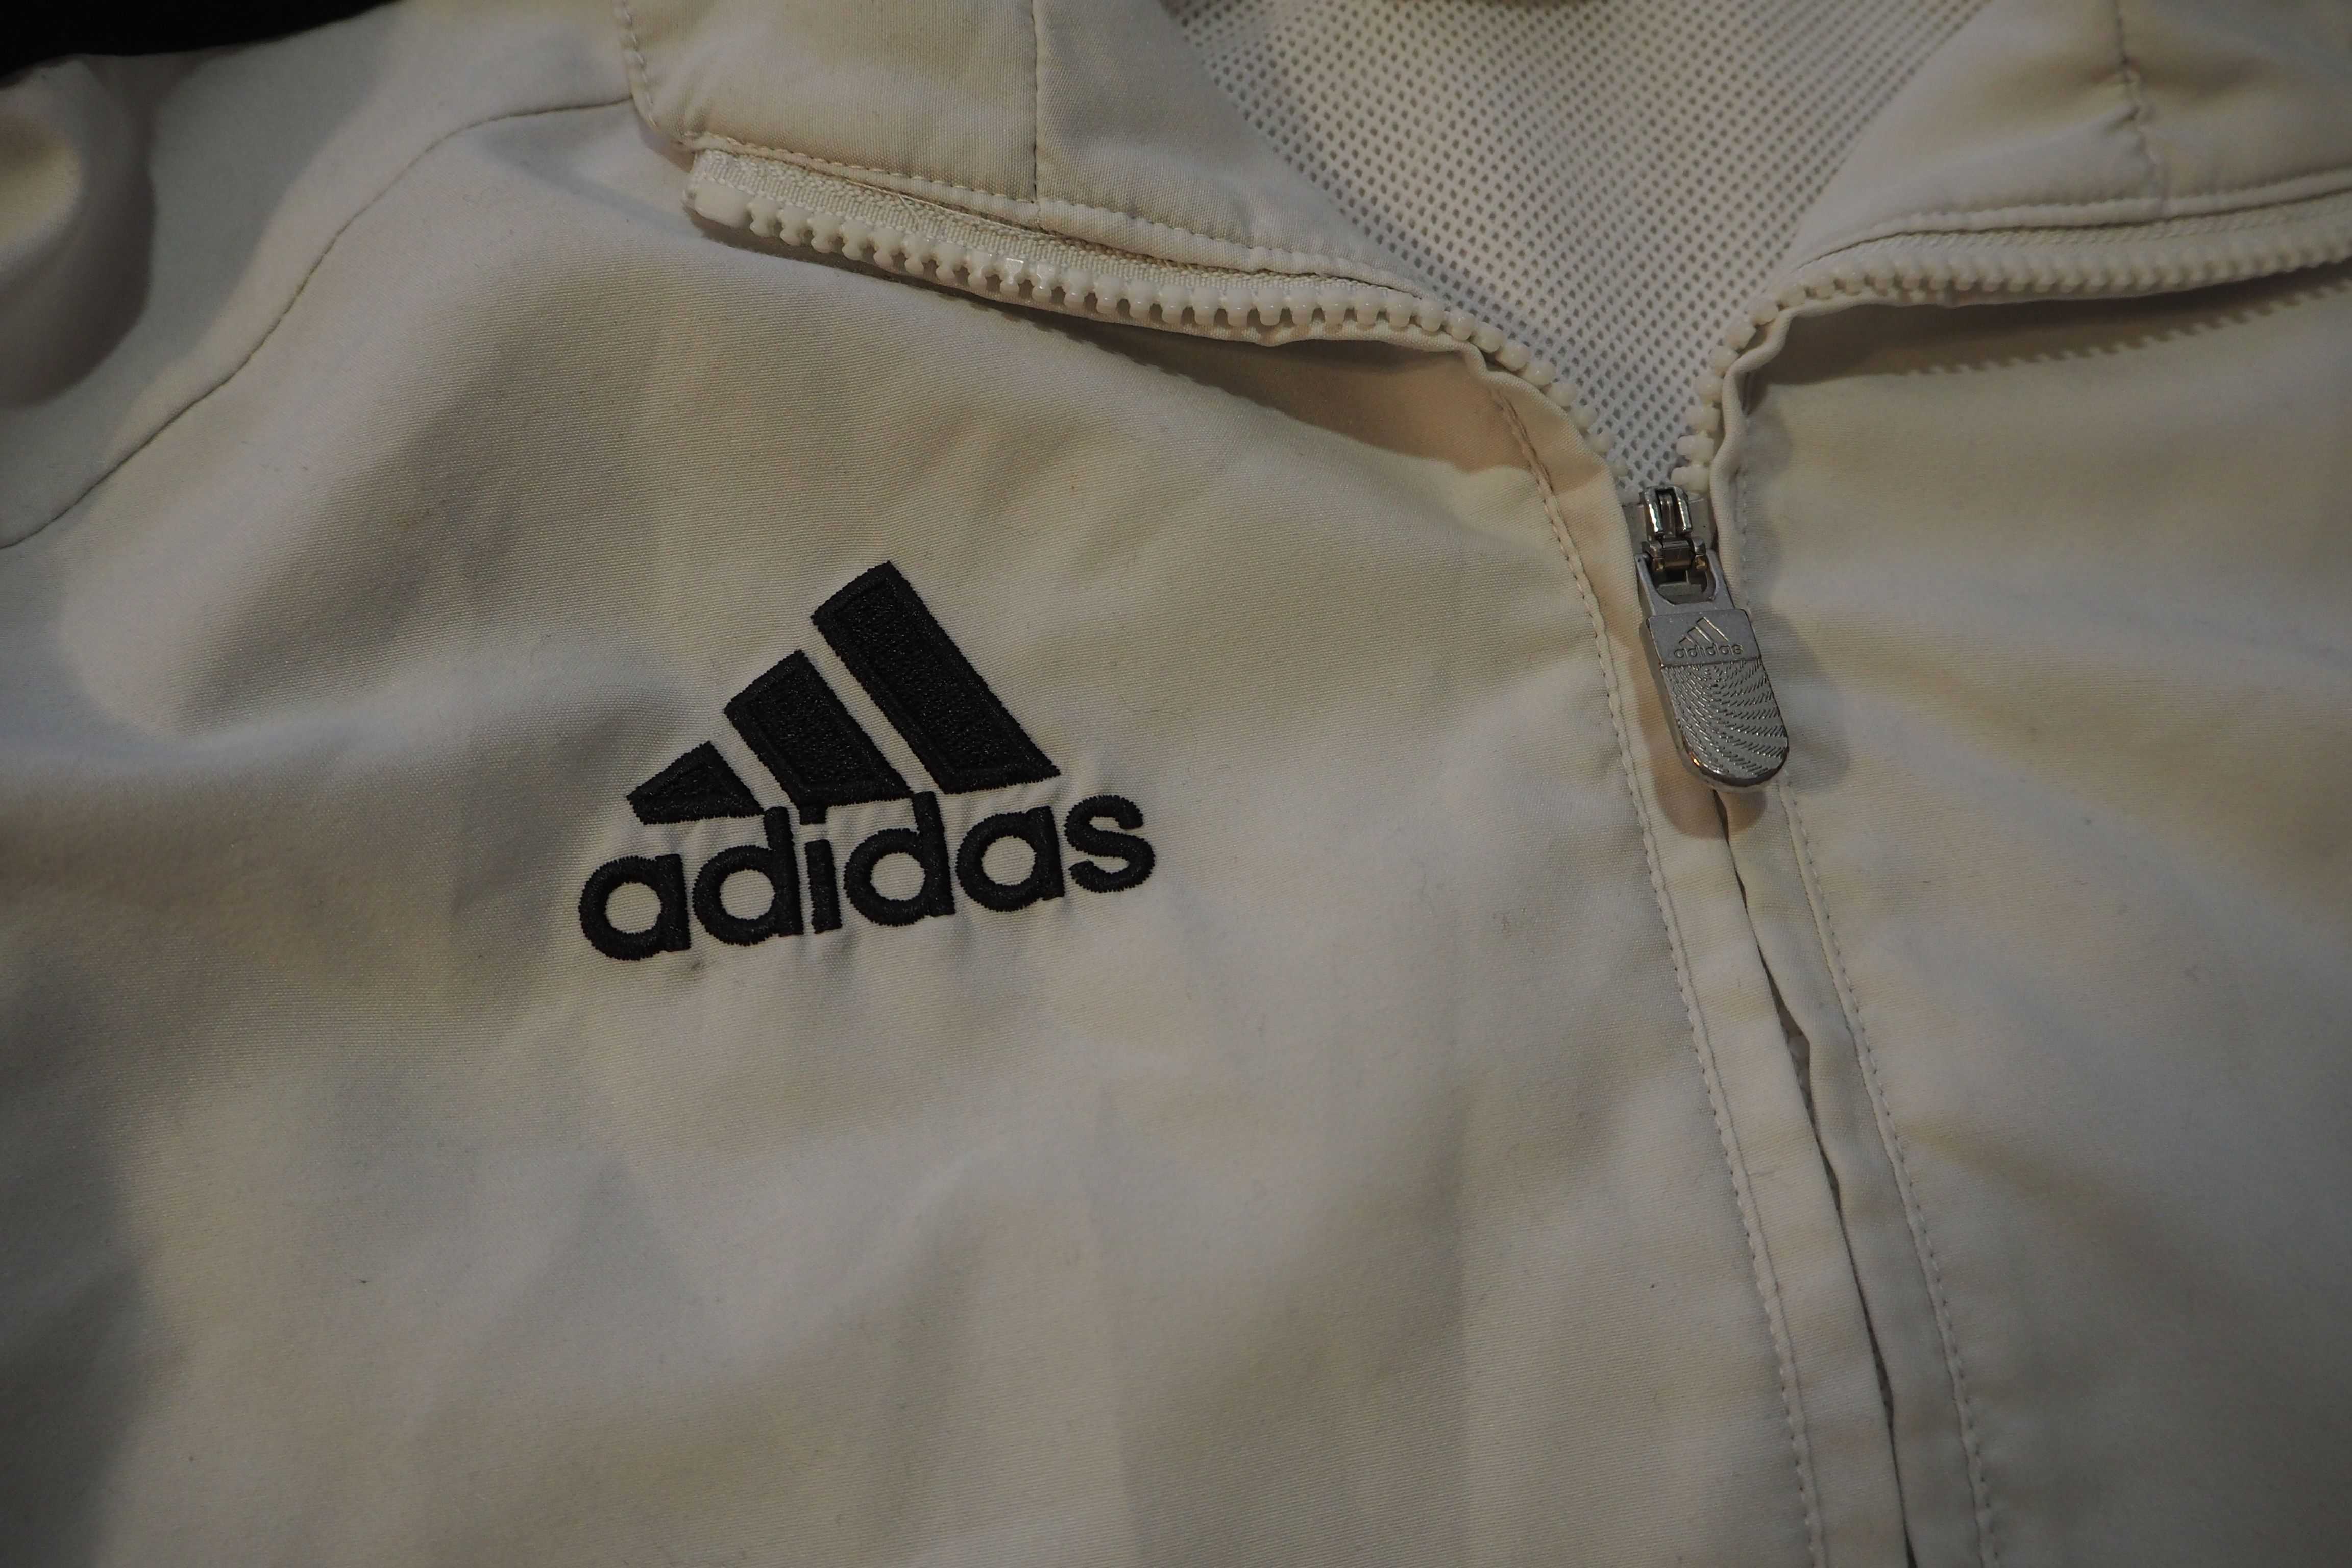 Adidas RUSSIAN style adidas jacket Size US S / EU 44-46 / 1 - 2 Preview